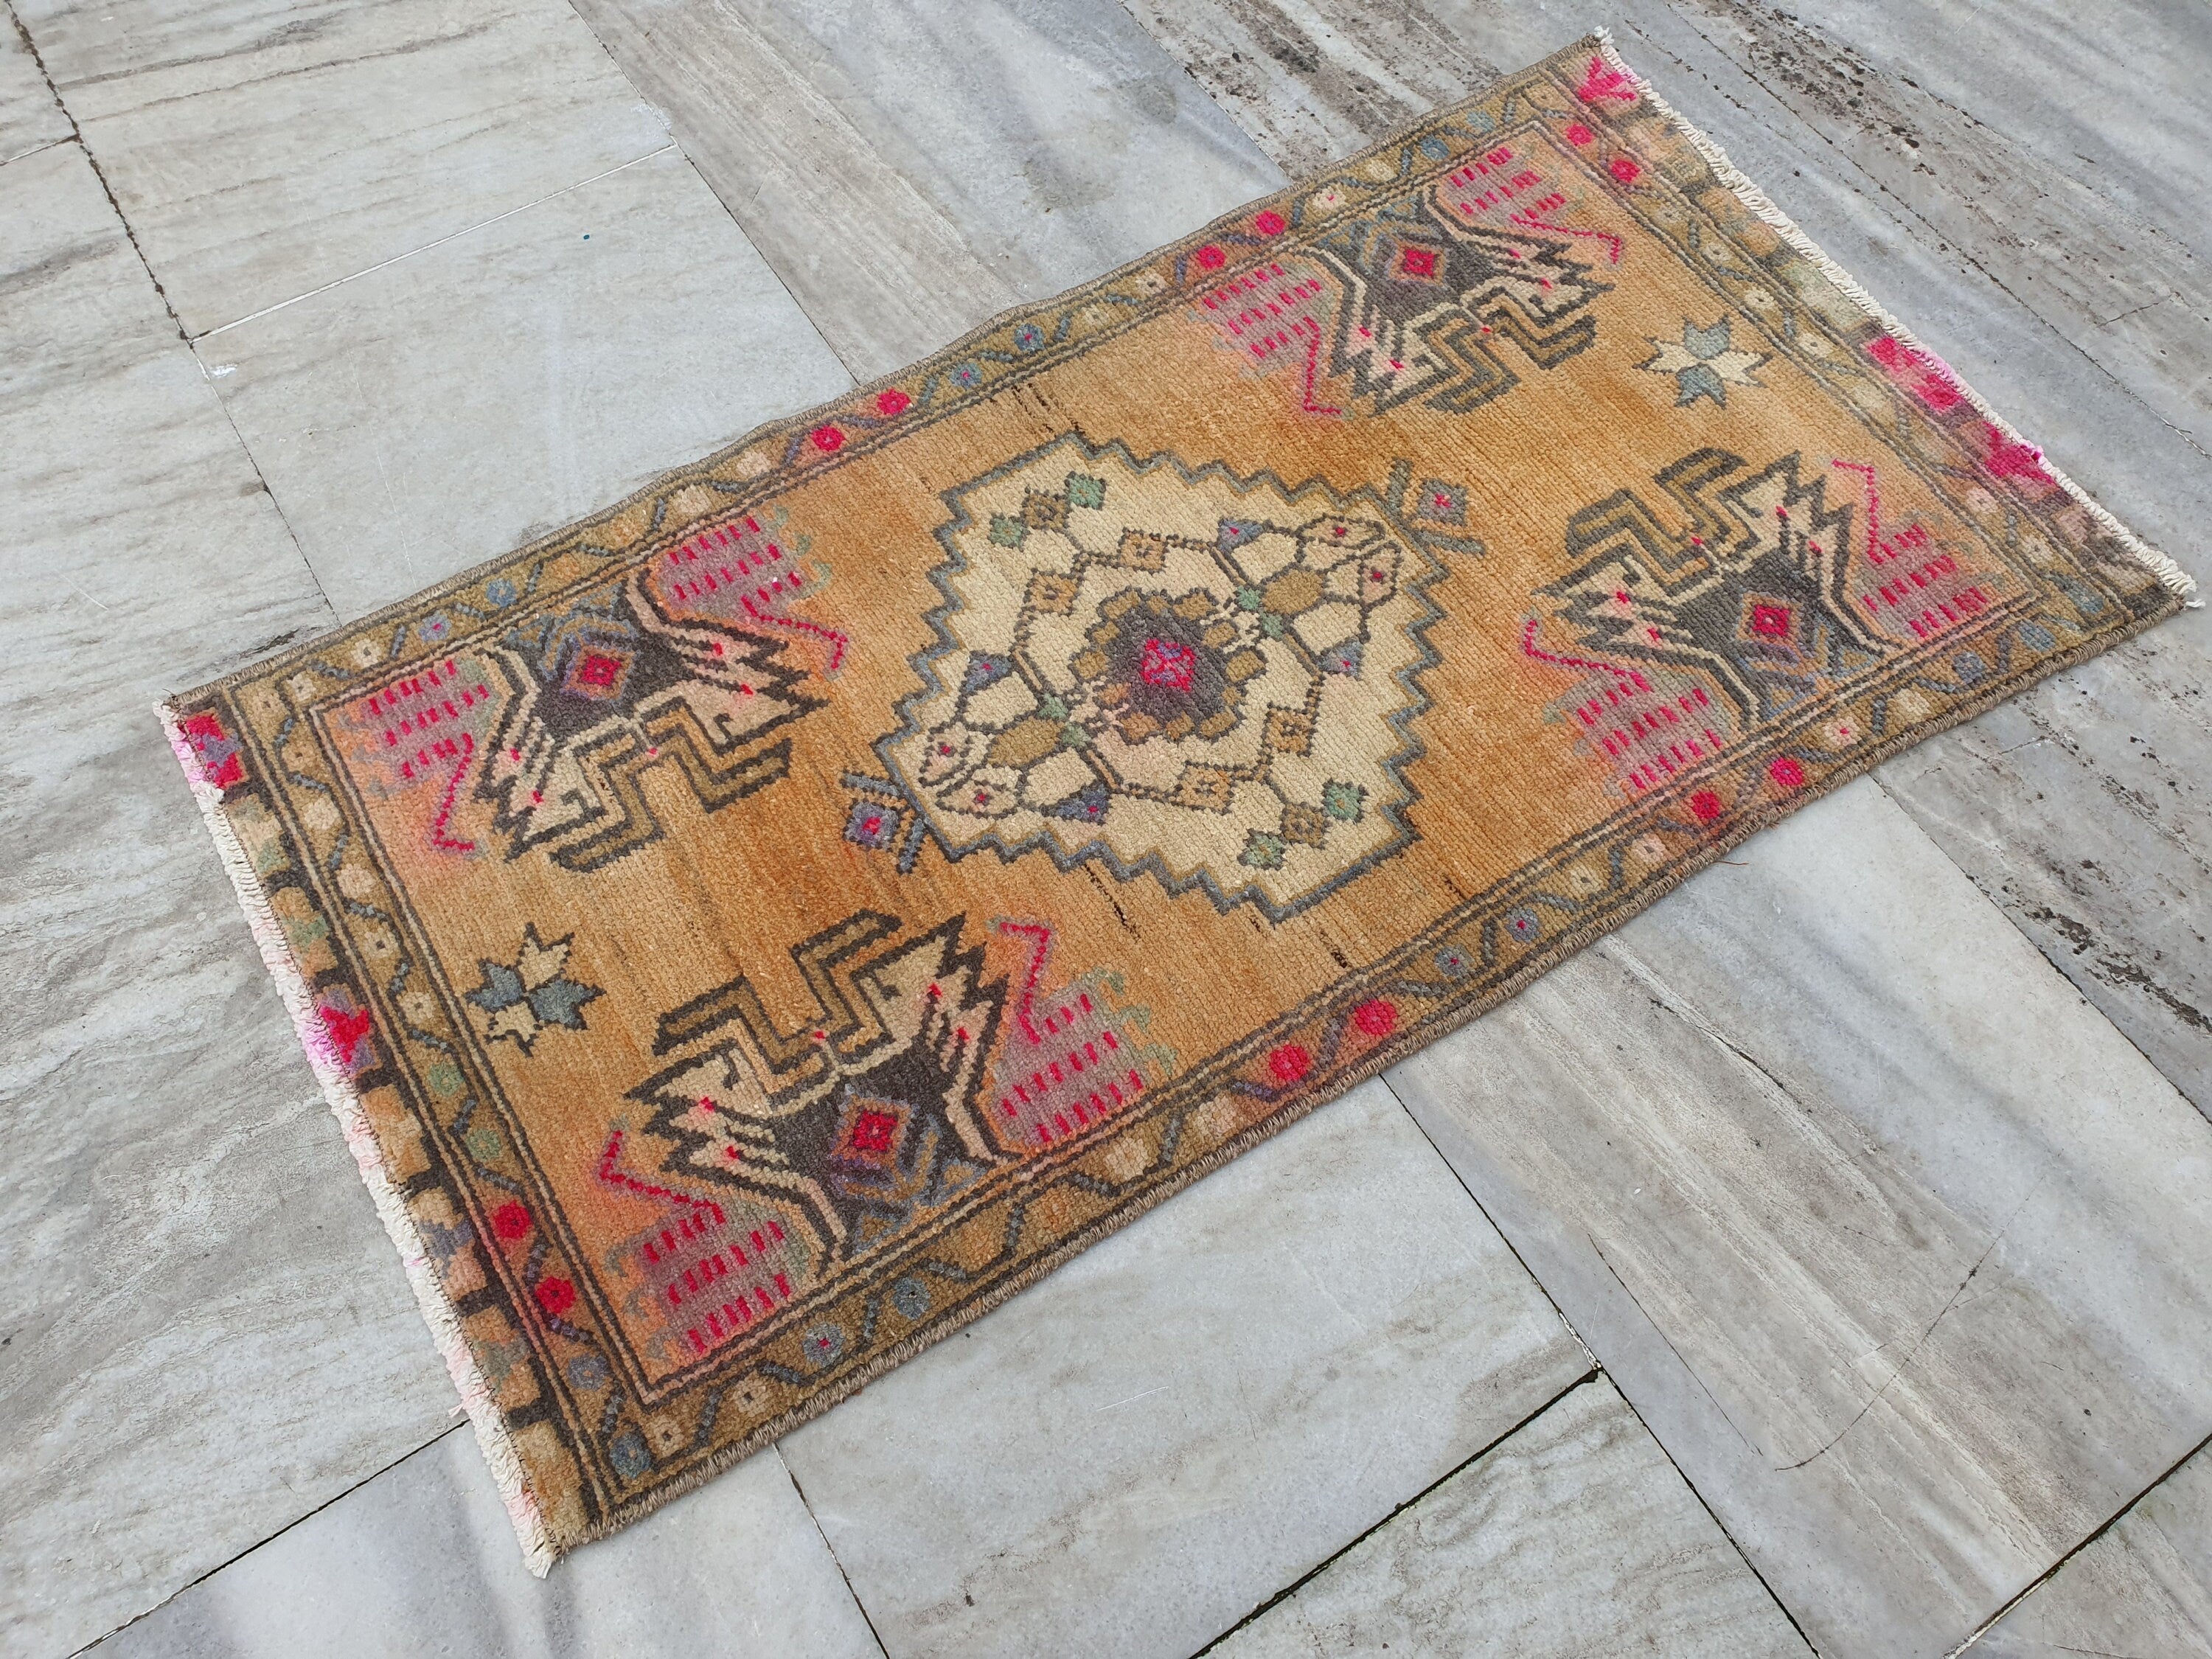 Small Turkish Rug 2 ft 9 in x 1 ft 5 in, Pink and Grey Vintage Doormat Entry or Bedside Rug